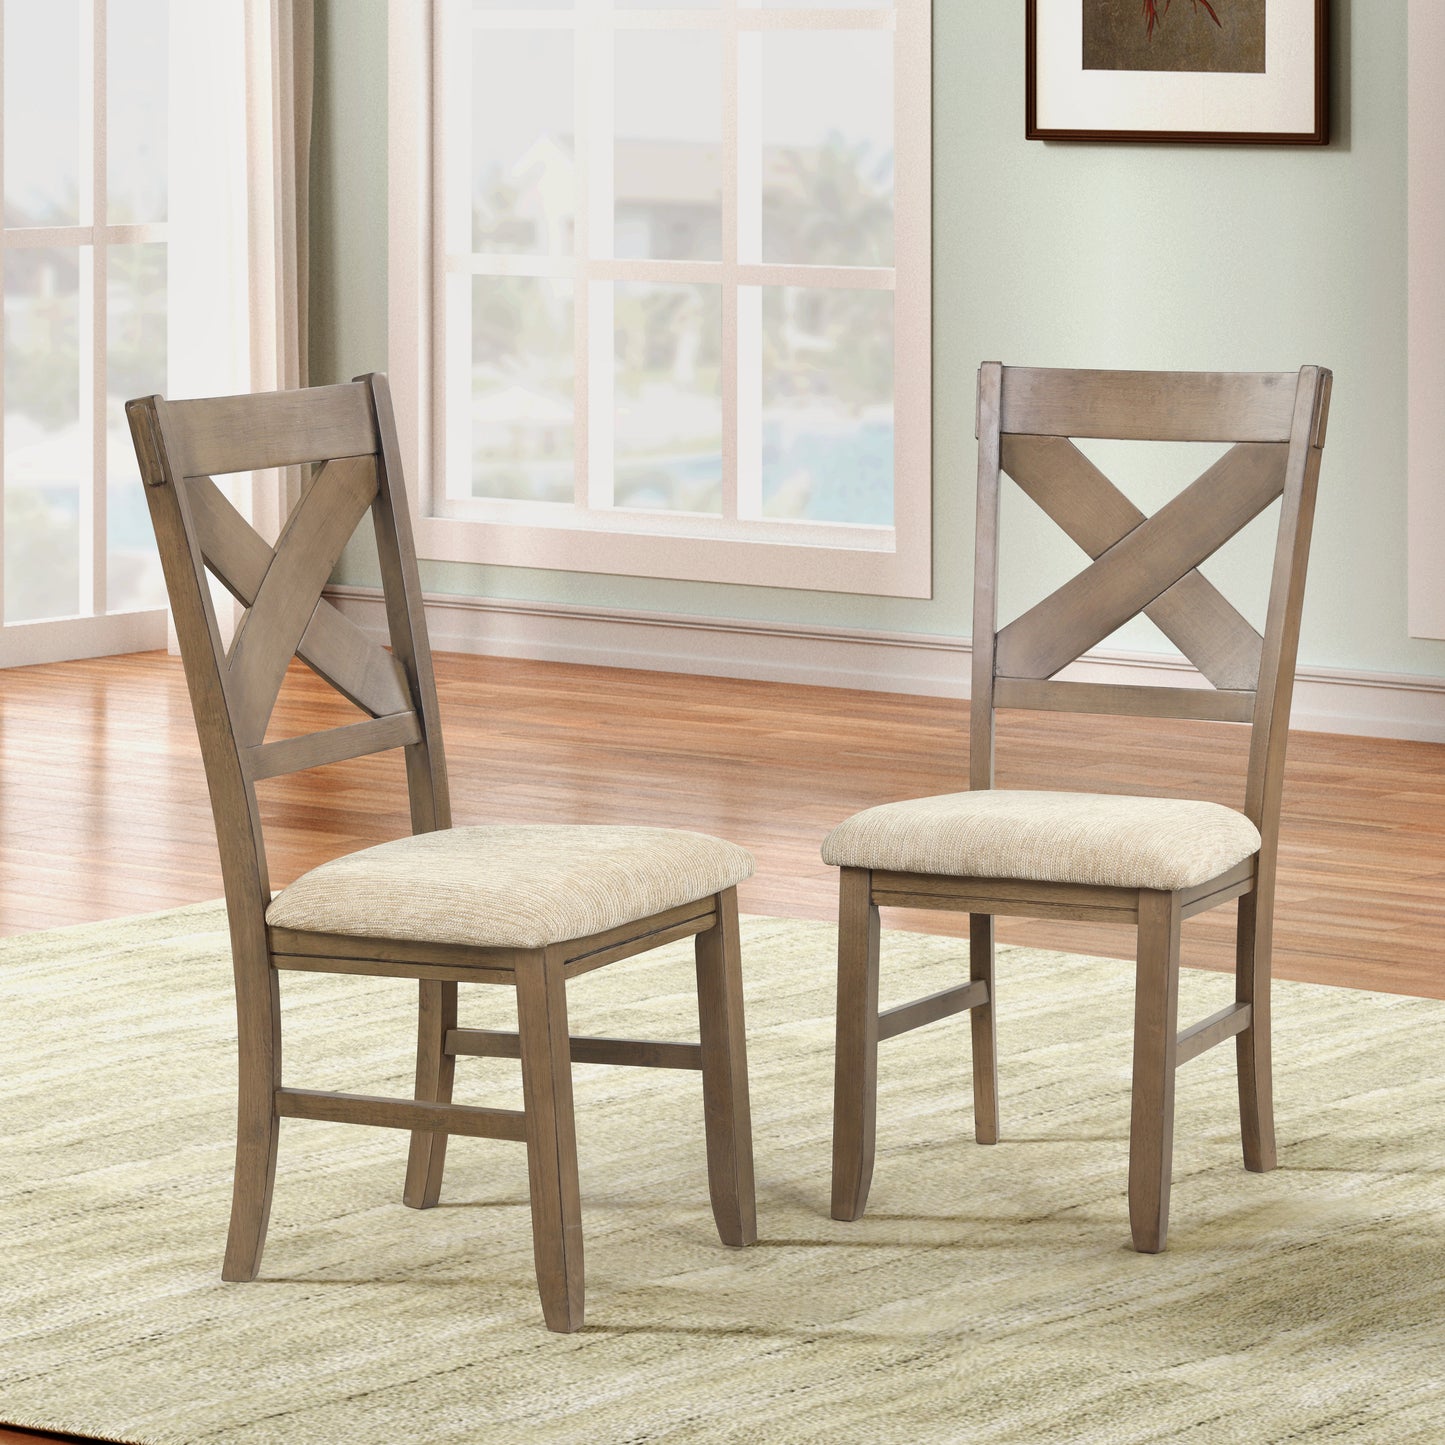 Raven Wood 5-Piece Dining Set, Extendable Trestle Dining Table with 4 Chairs, Glazed Pine Brown